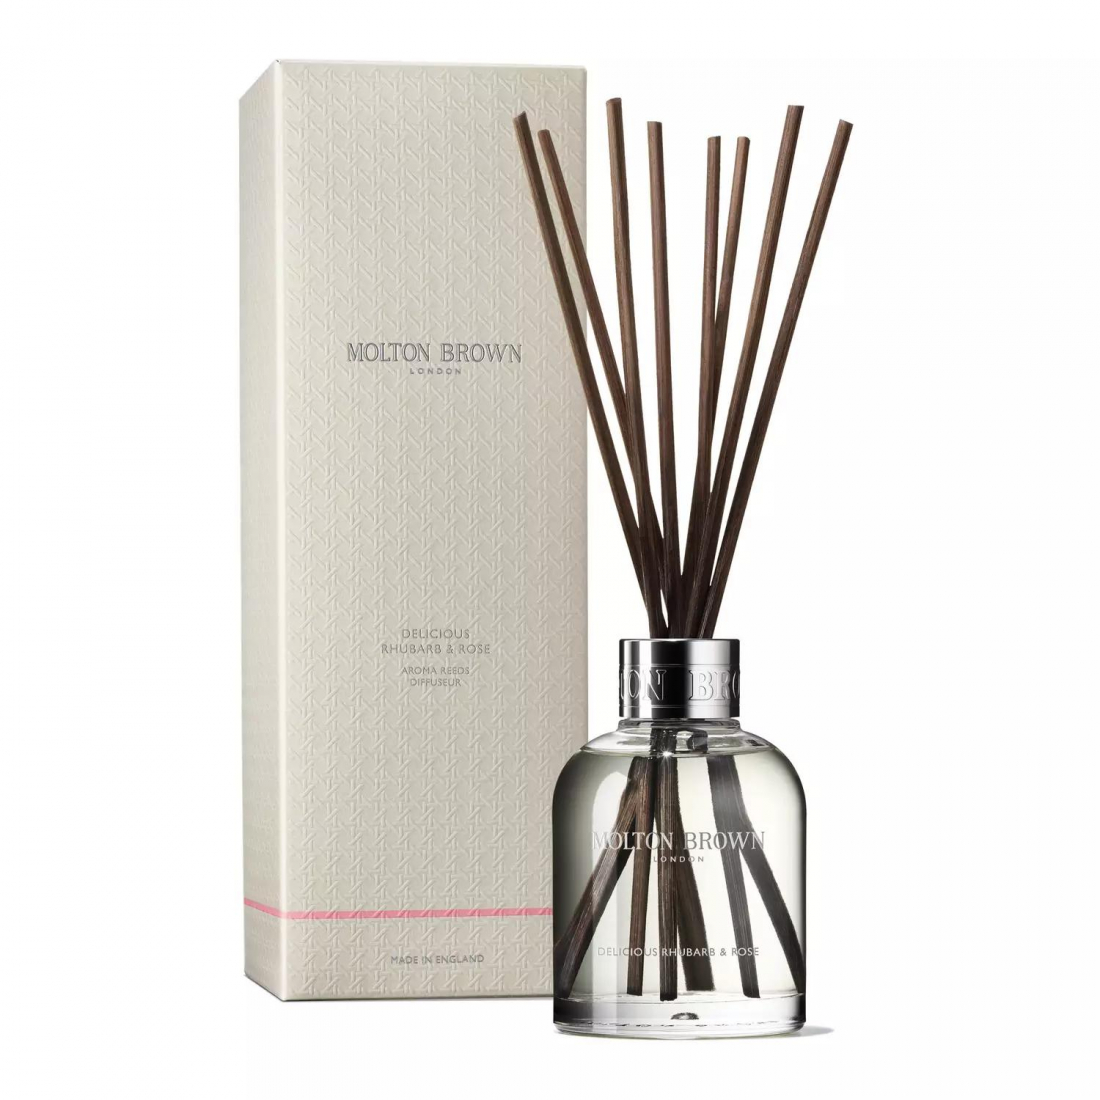 'Delicious Rhubarb & Rose' Reed Diffuser - 150 ml